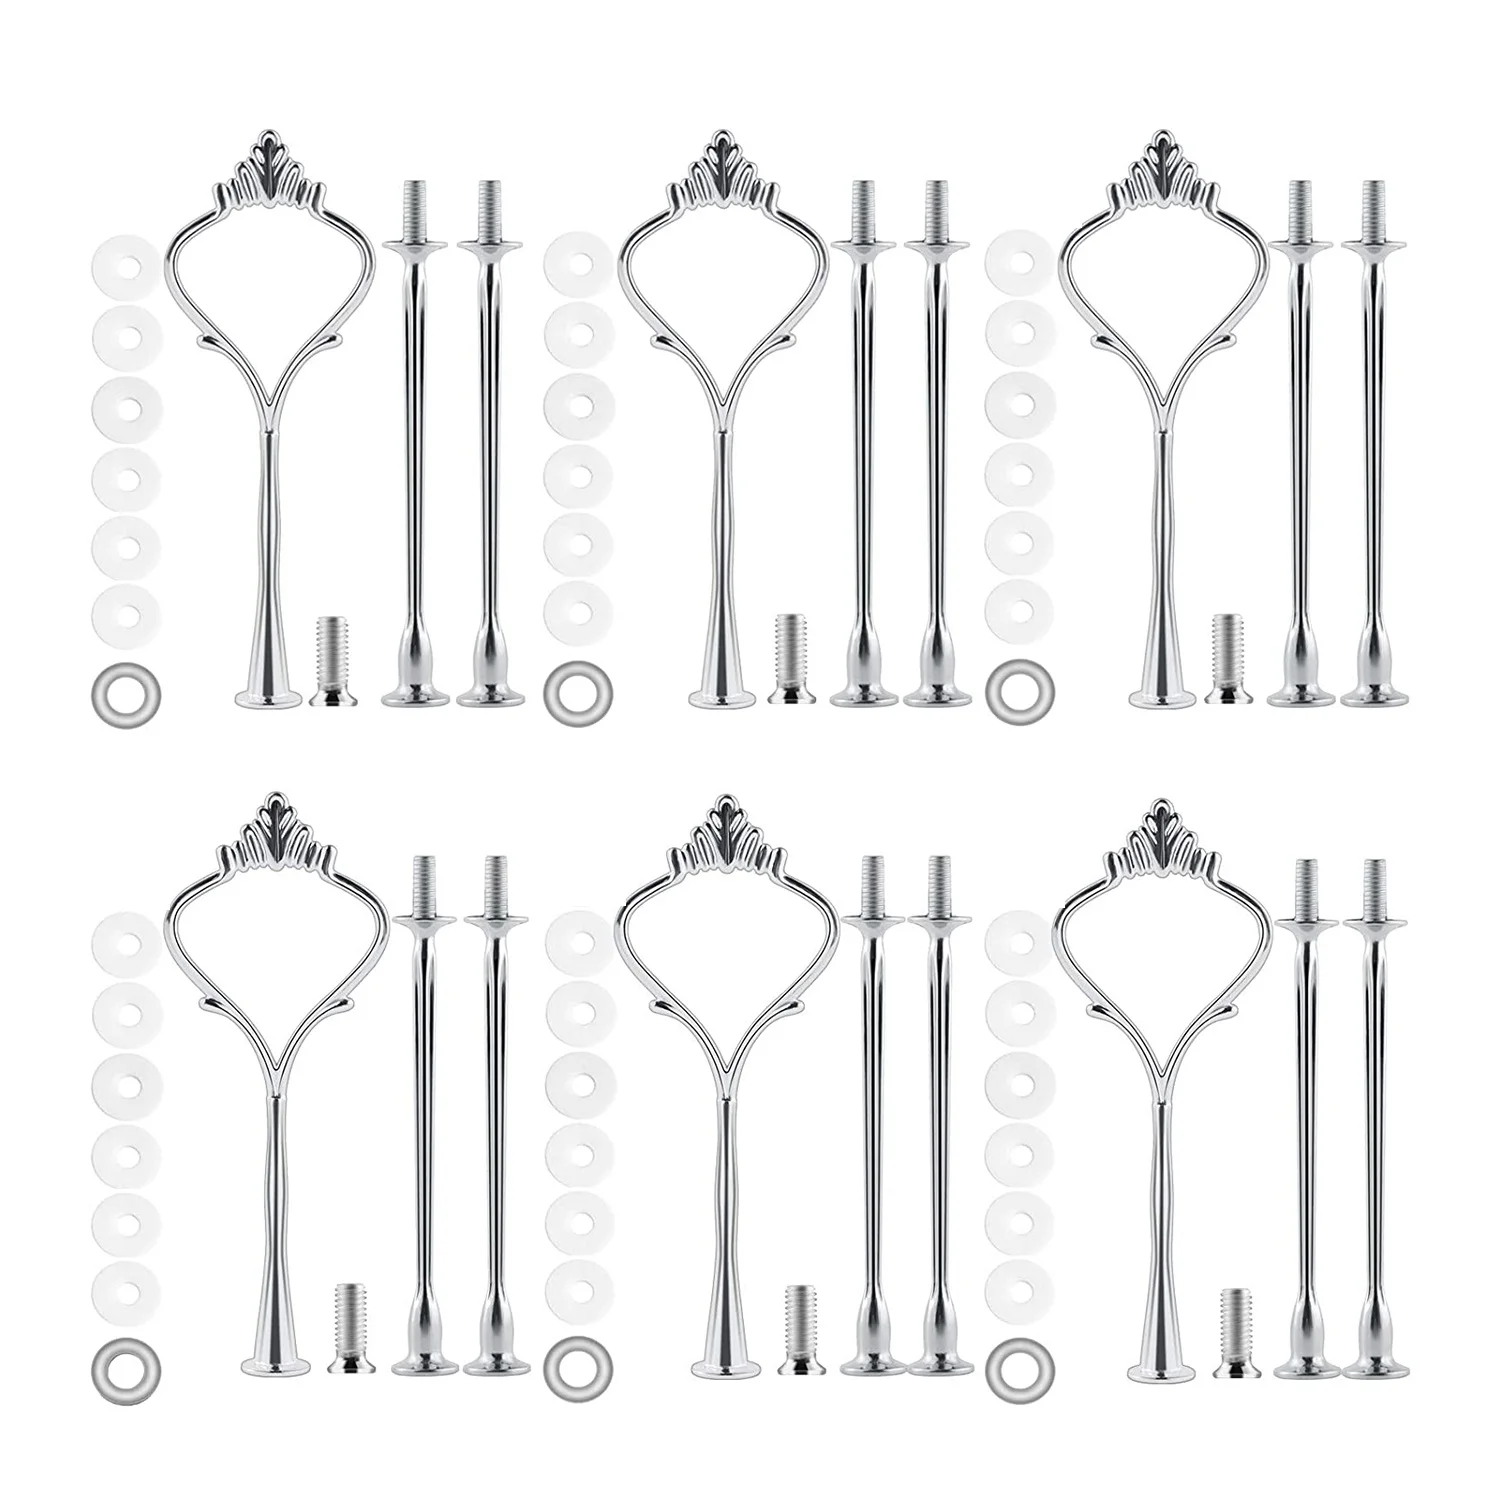 

6 Set Tray Hardware for Cake Stand 3 Tier Cake Stand Fitting Hardware Holder for Wedding and Party Serving Tray(Silver)